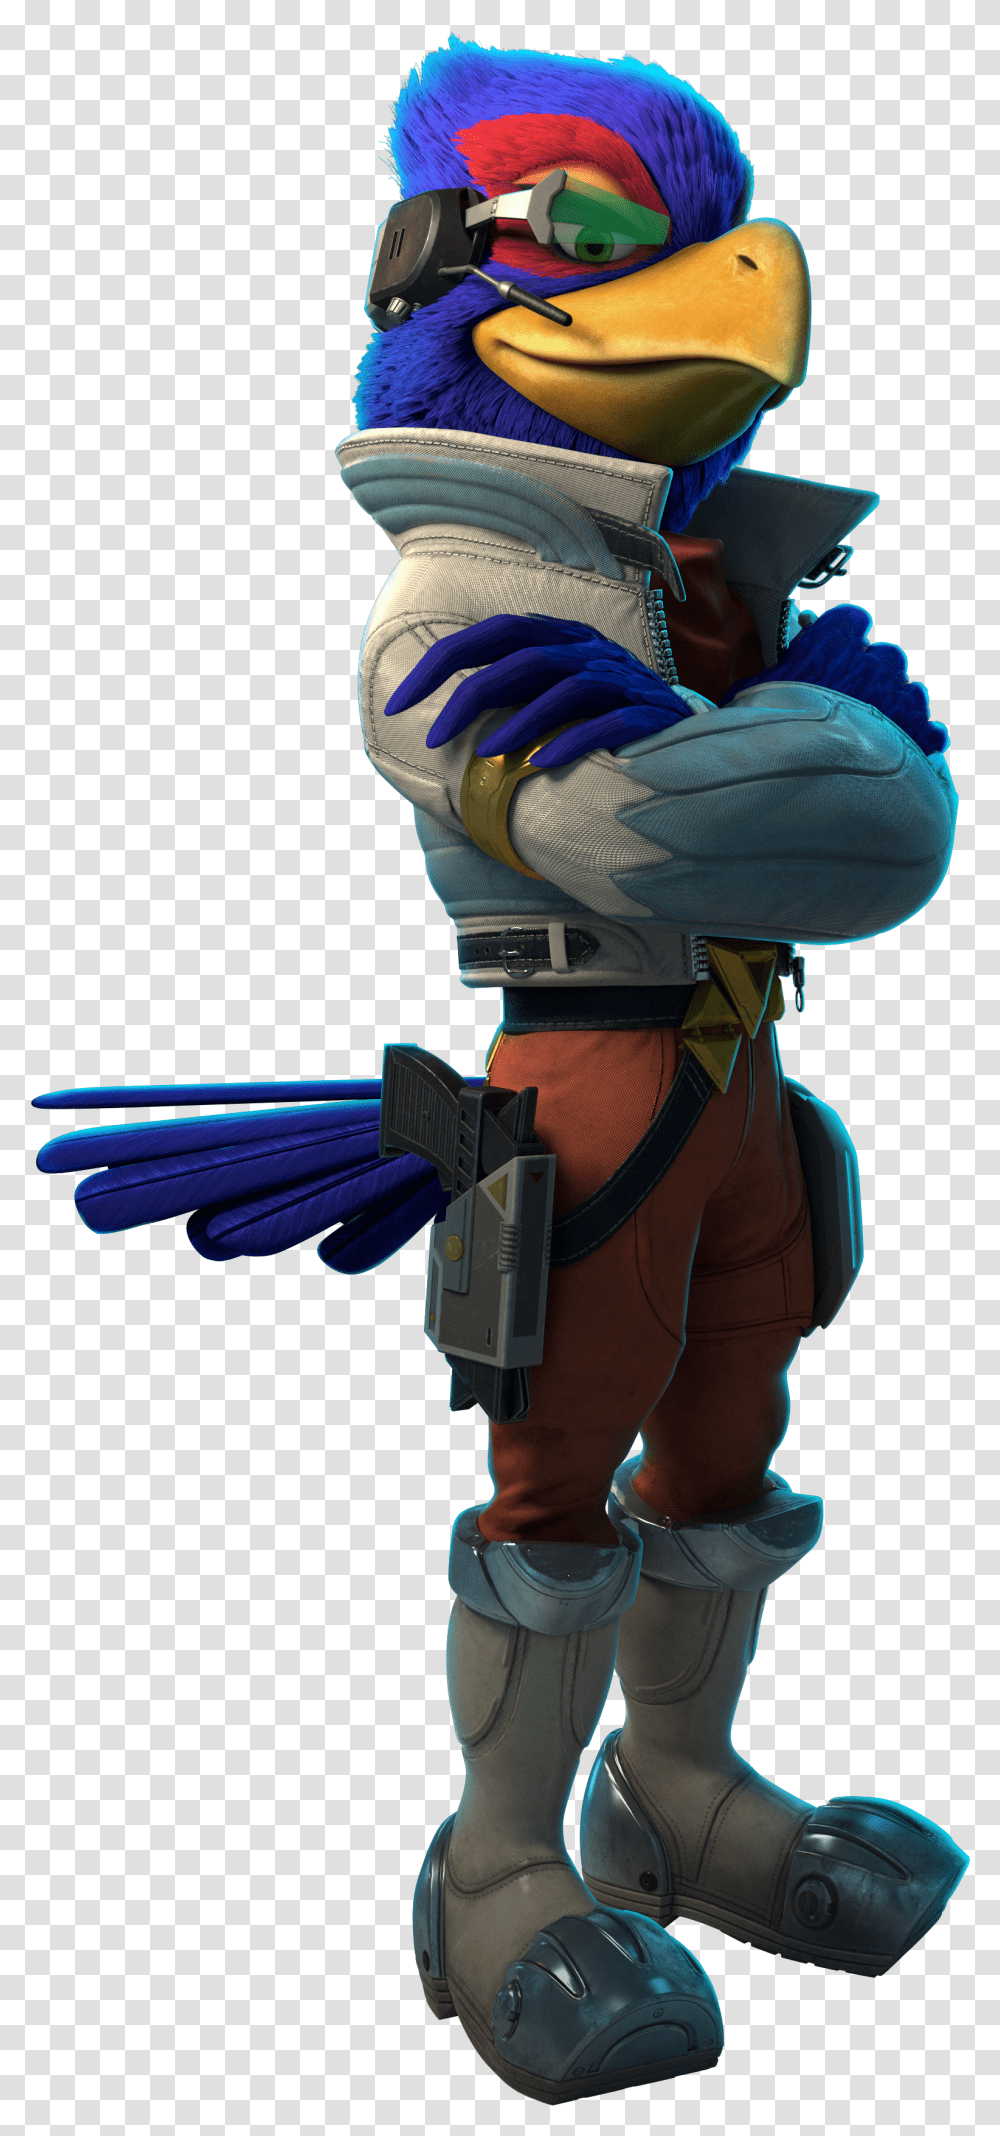 Starlink Battle For Atlas To Add More Star Fox Characters Starlink Battle For Atlas Star Fox Transparent Png